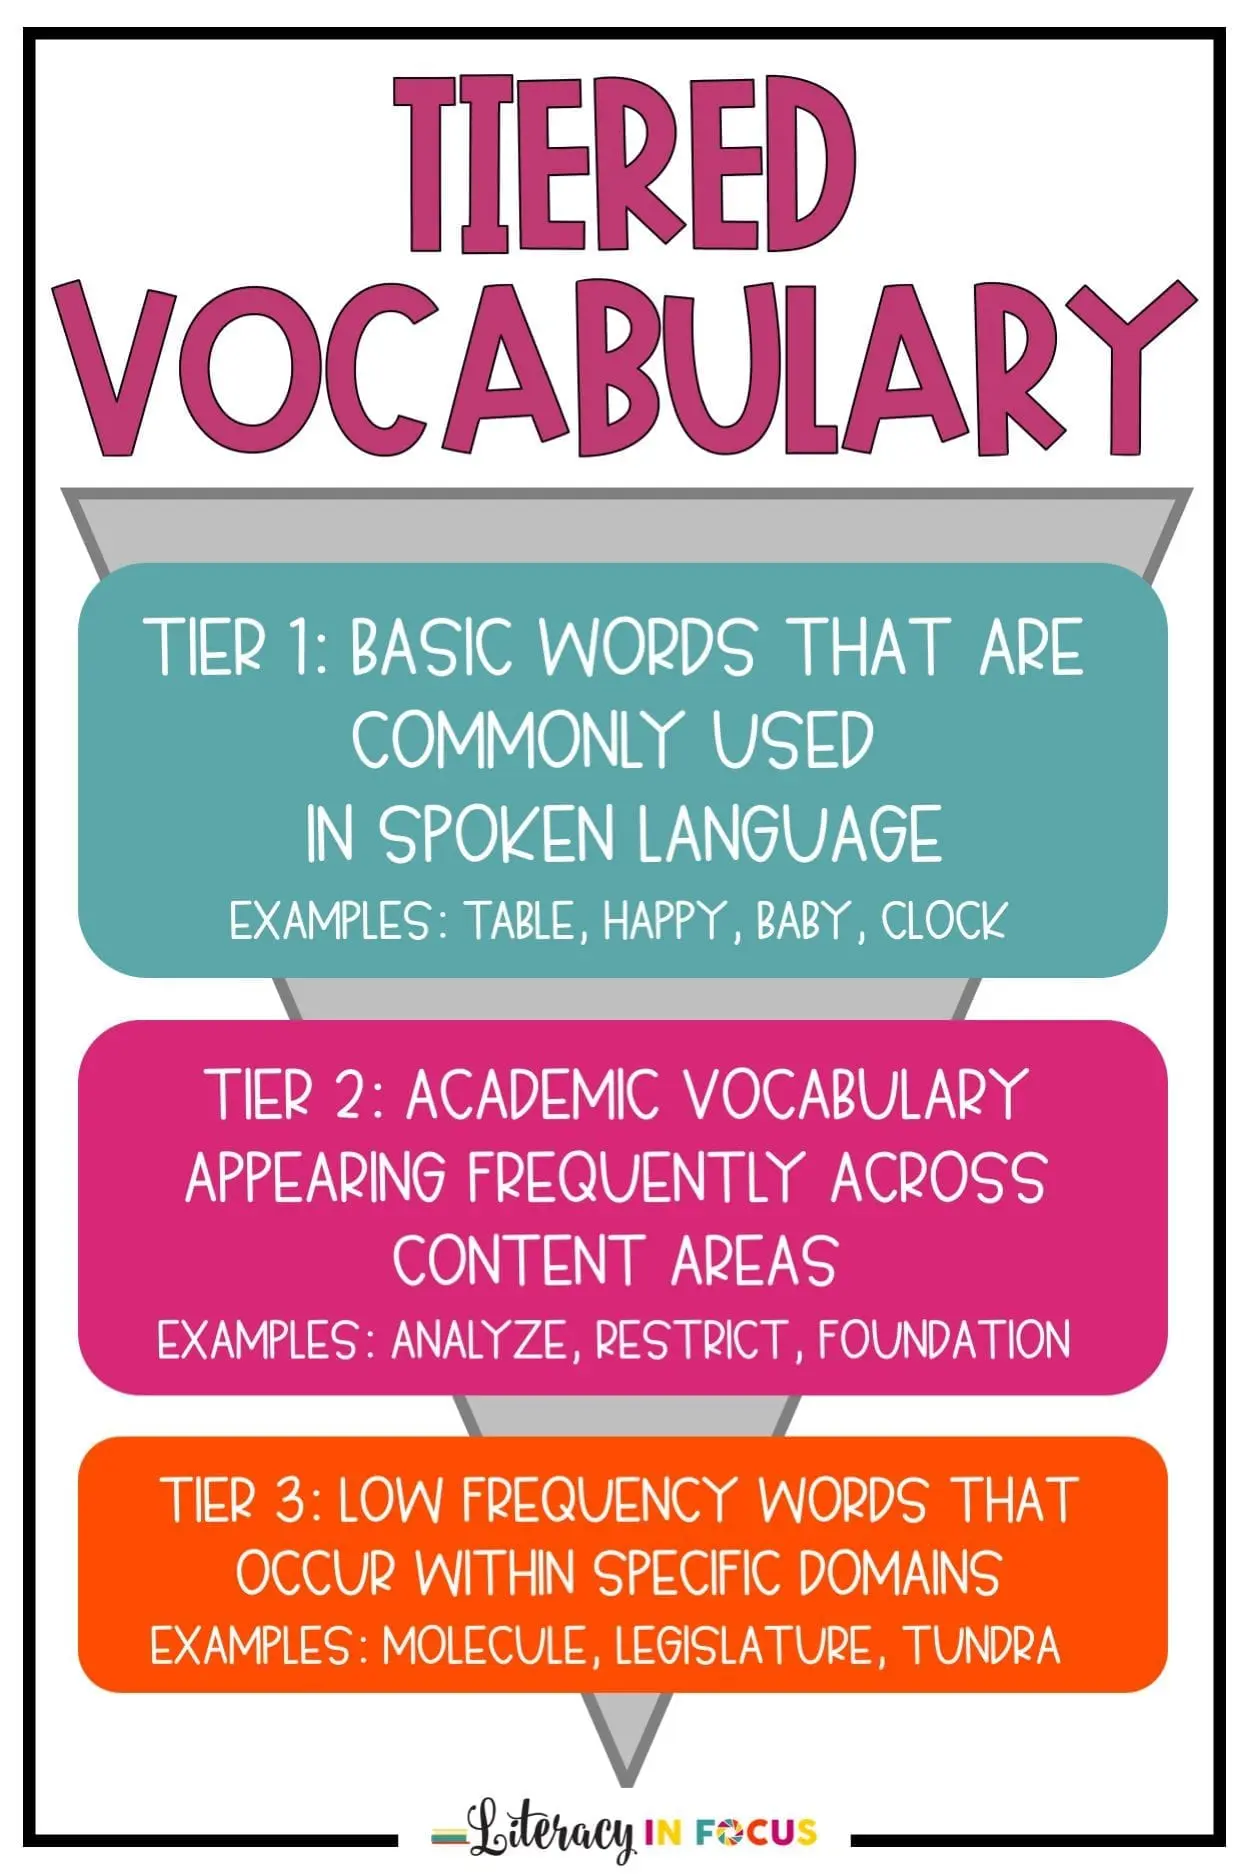 Tiered Vocabulary Infographic